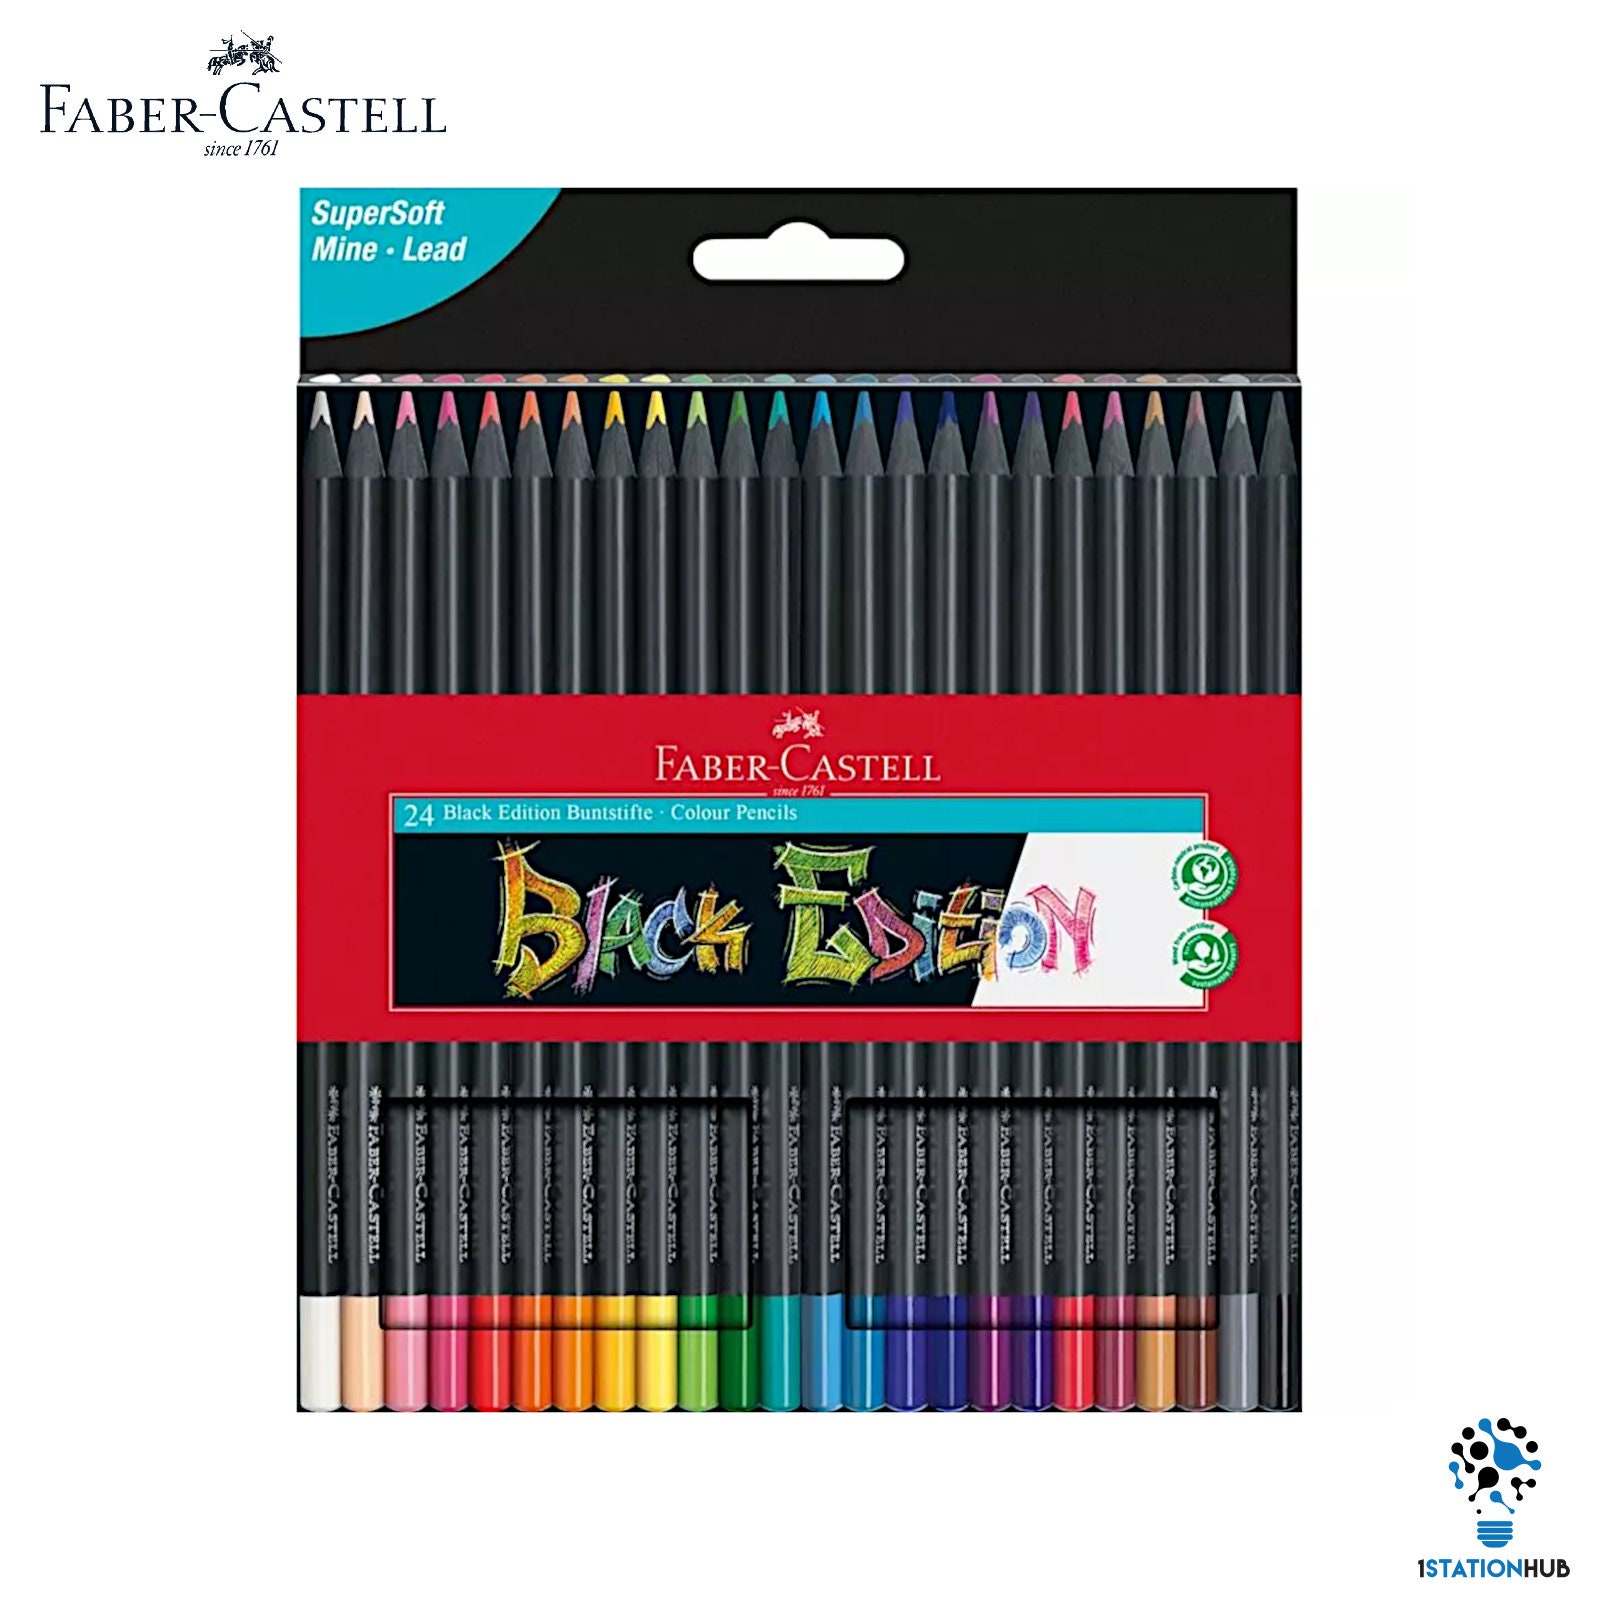 Meet the Color Grip pencils from Faber-Castell